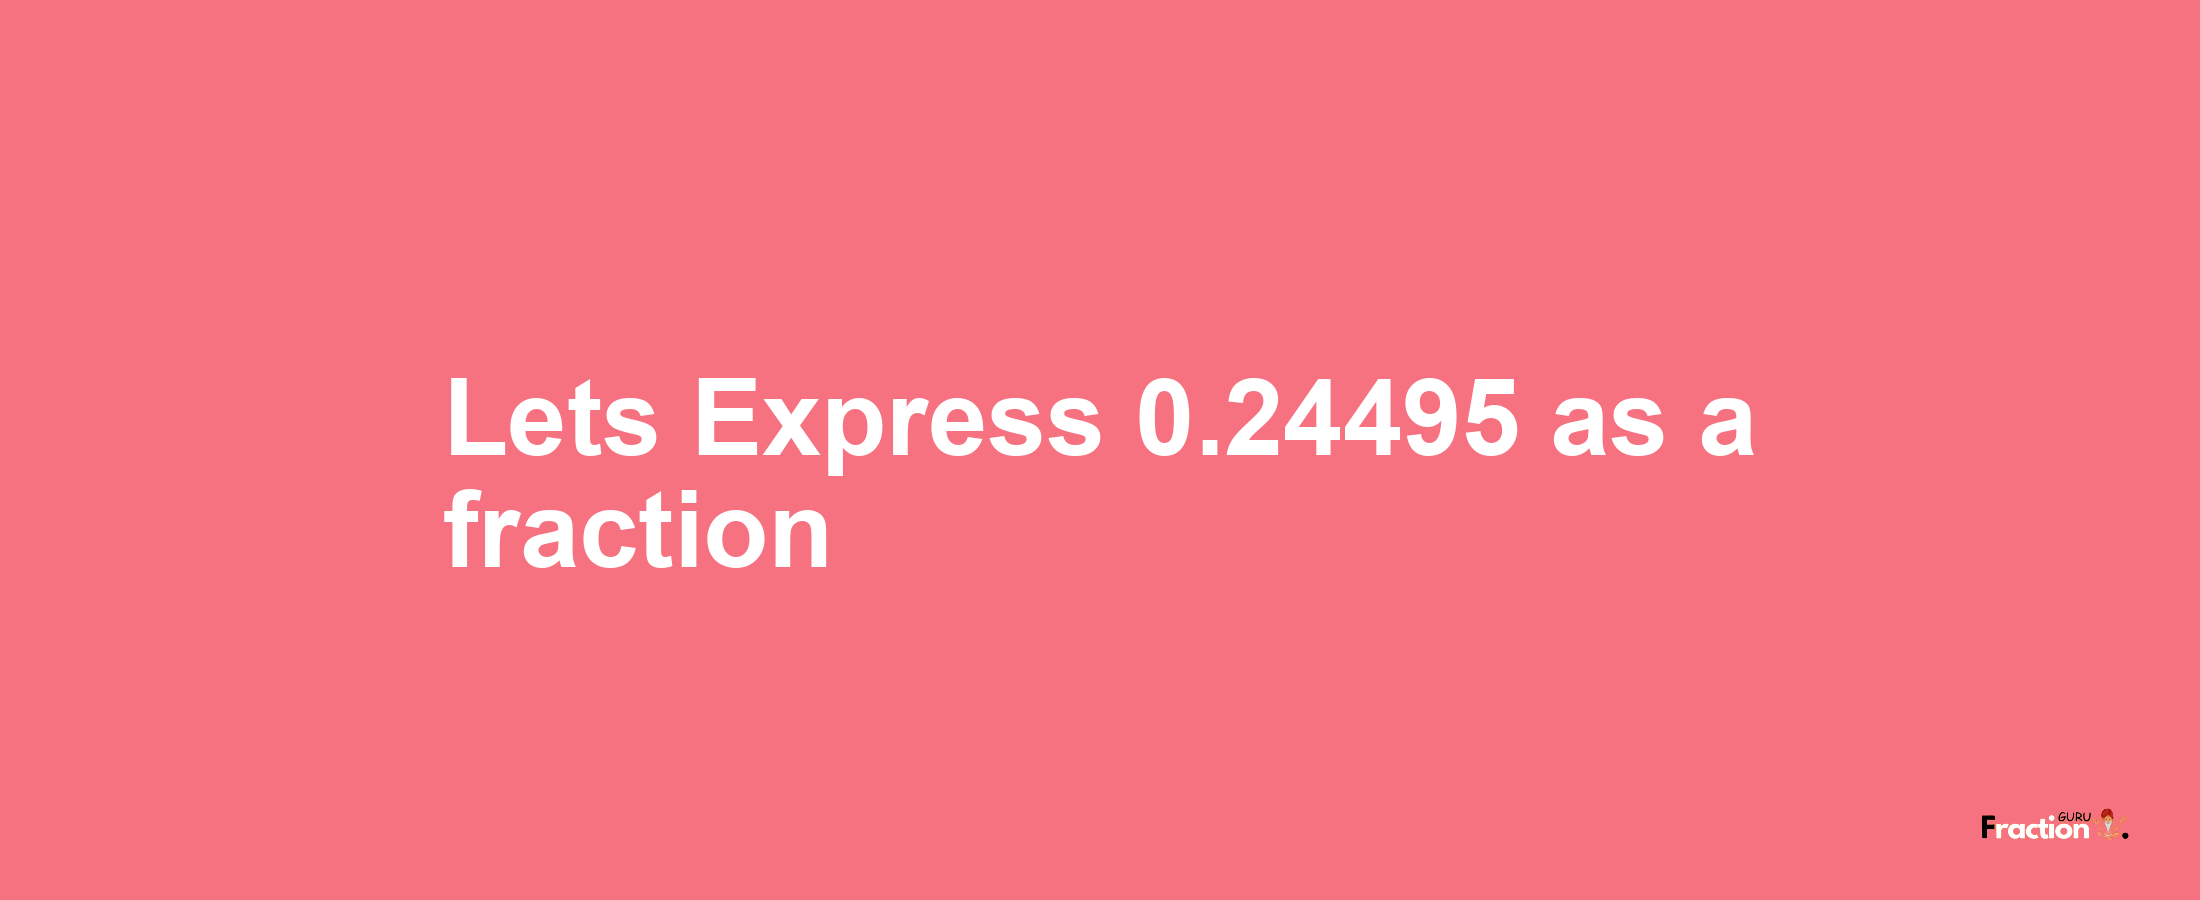 Lets Express 0.24495 as afraction